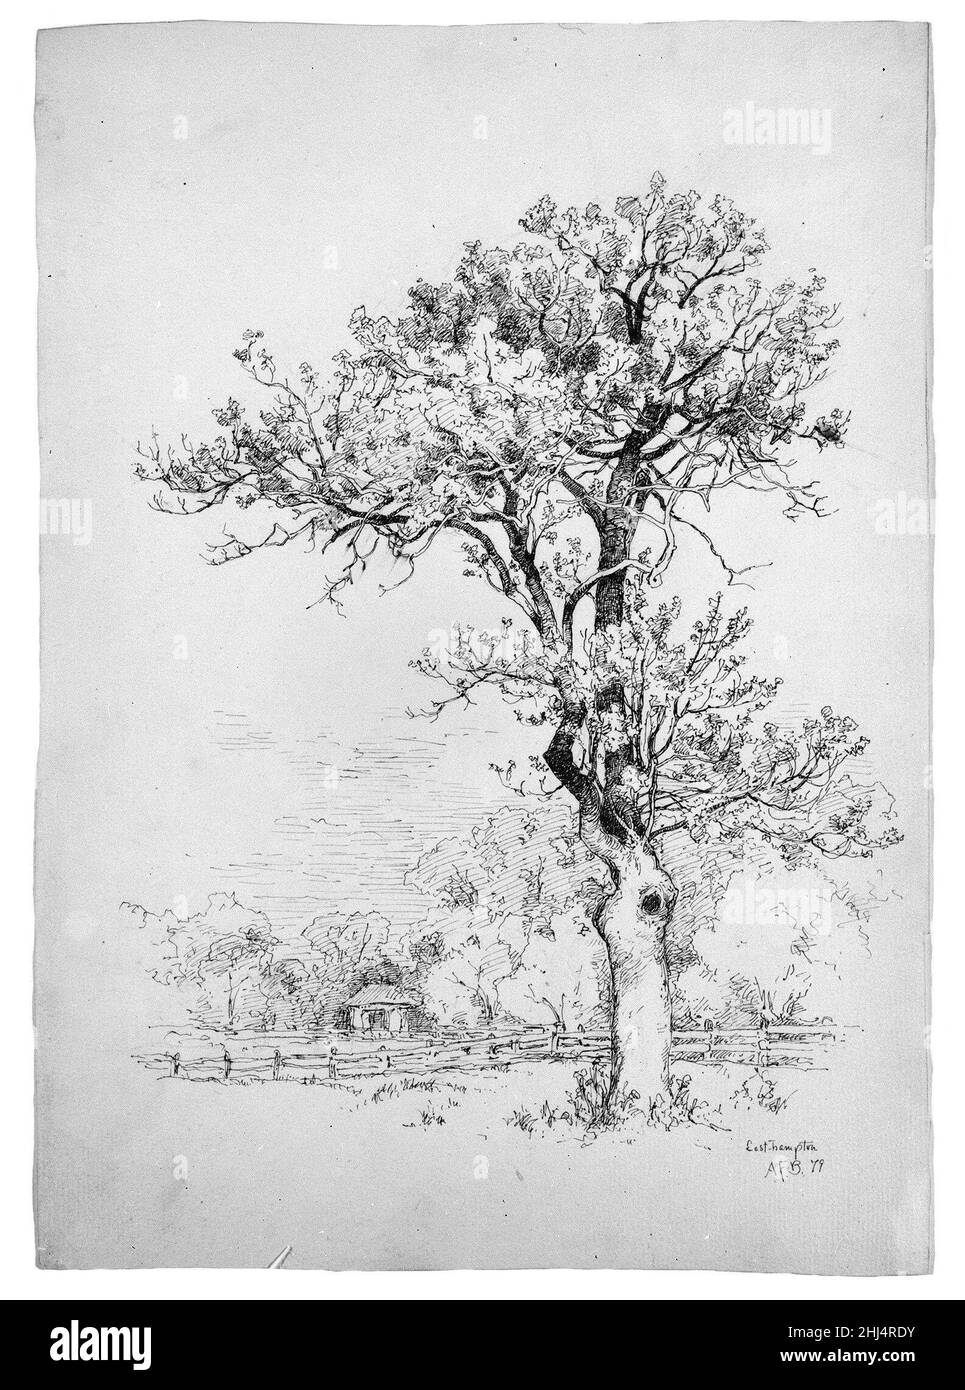 East Hampton, Long Island 1879 Andrew Fisher Bunner. East Hampton, Long Island. Andrew Fisher Bunner (1841–1897). American. 1879. Black ink and graphite traces on off-white wove paper Stock Photo